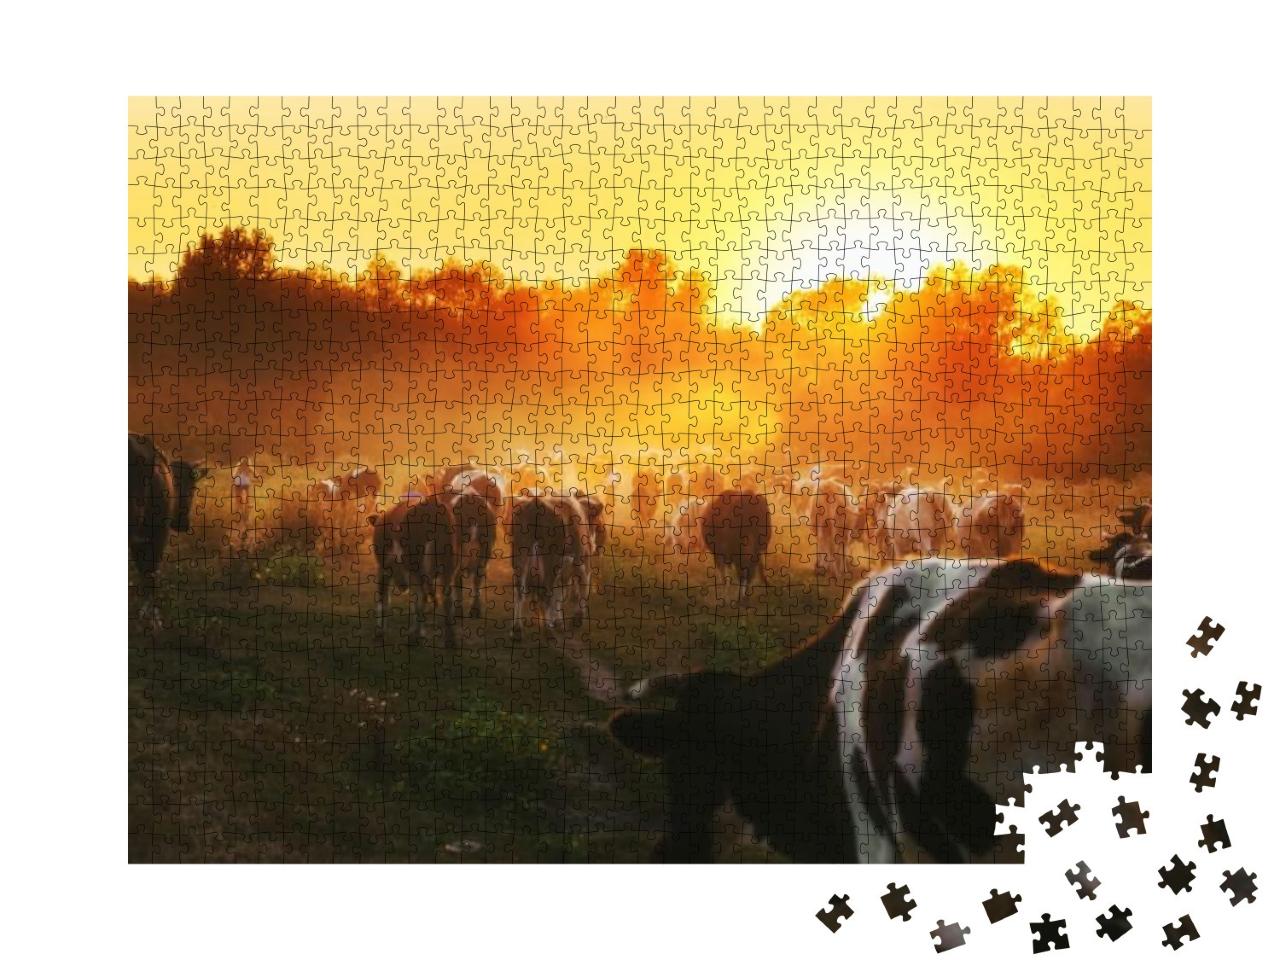 Epic Scene of Cattle Farm - Livestock of Cows Going Home... Jigsaw Puzzle with 1000 pieces